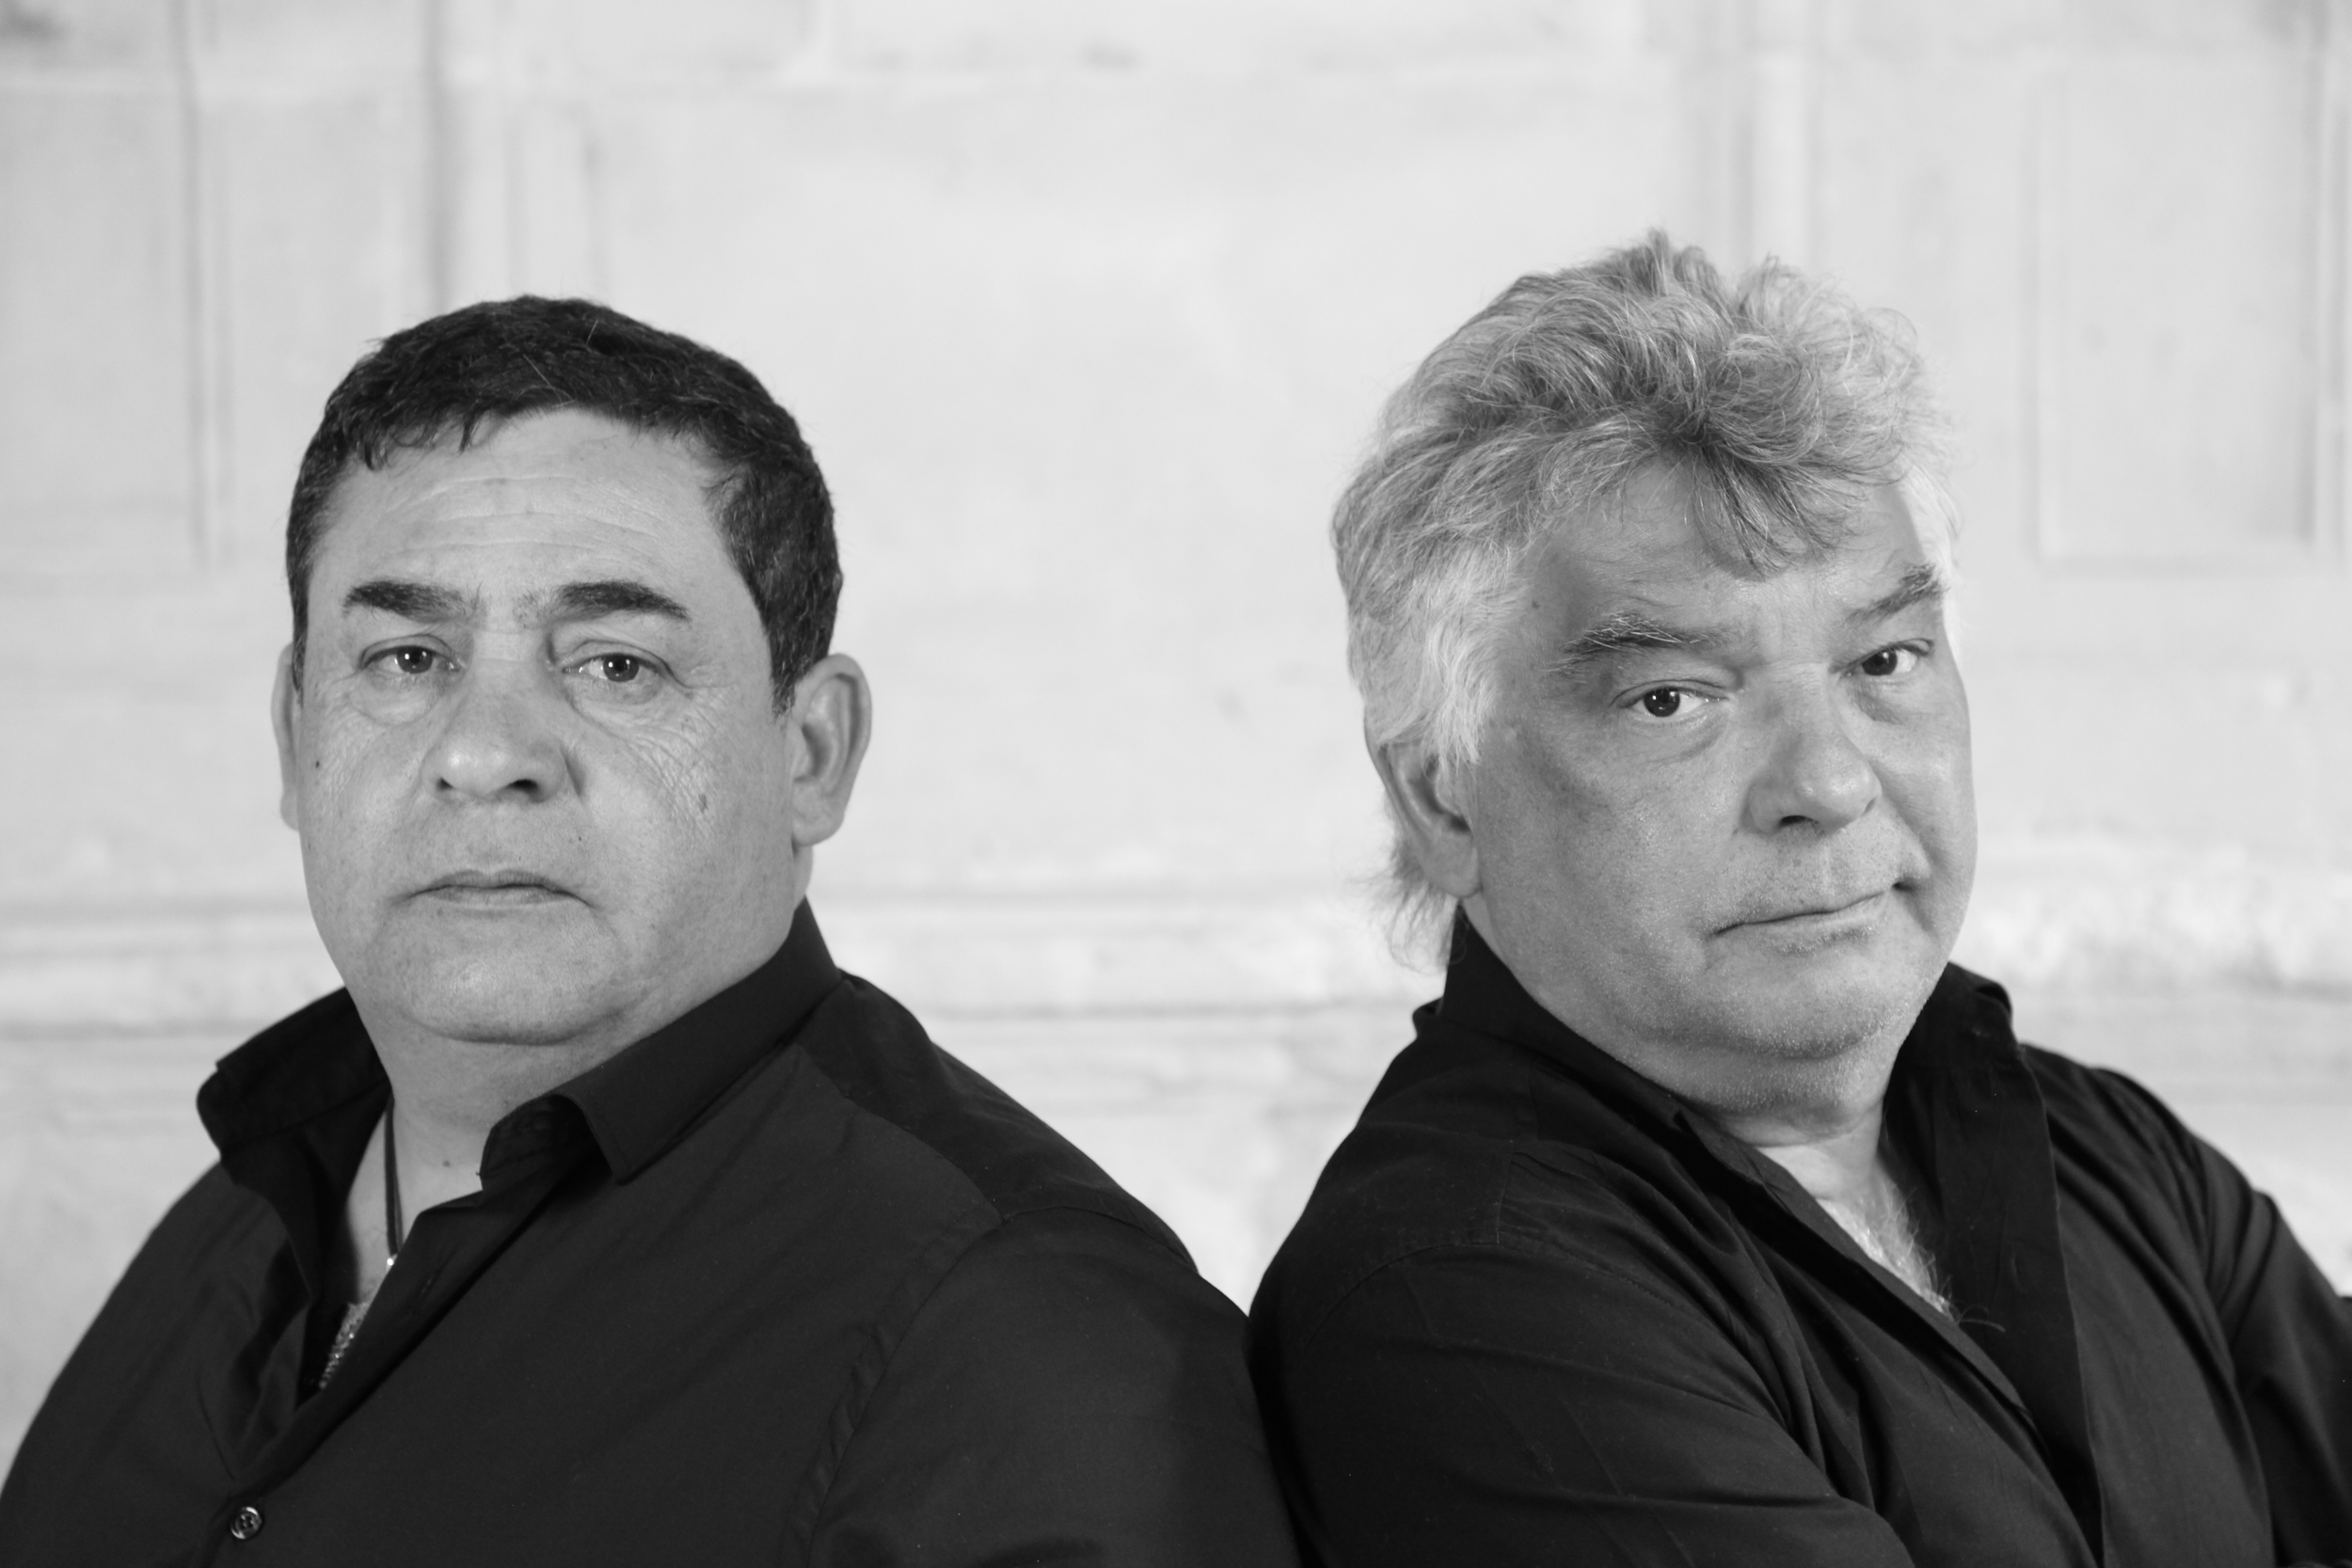 2015_(BW solo) Gipsy Kings APPROVED_Photo Credit is %22Marie Claire Margossian%22.JPG